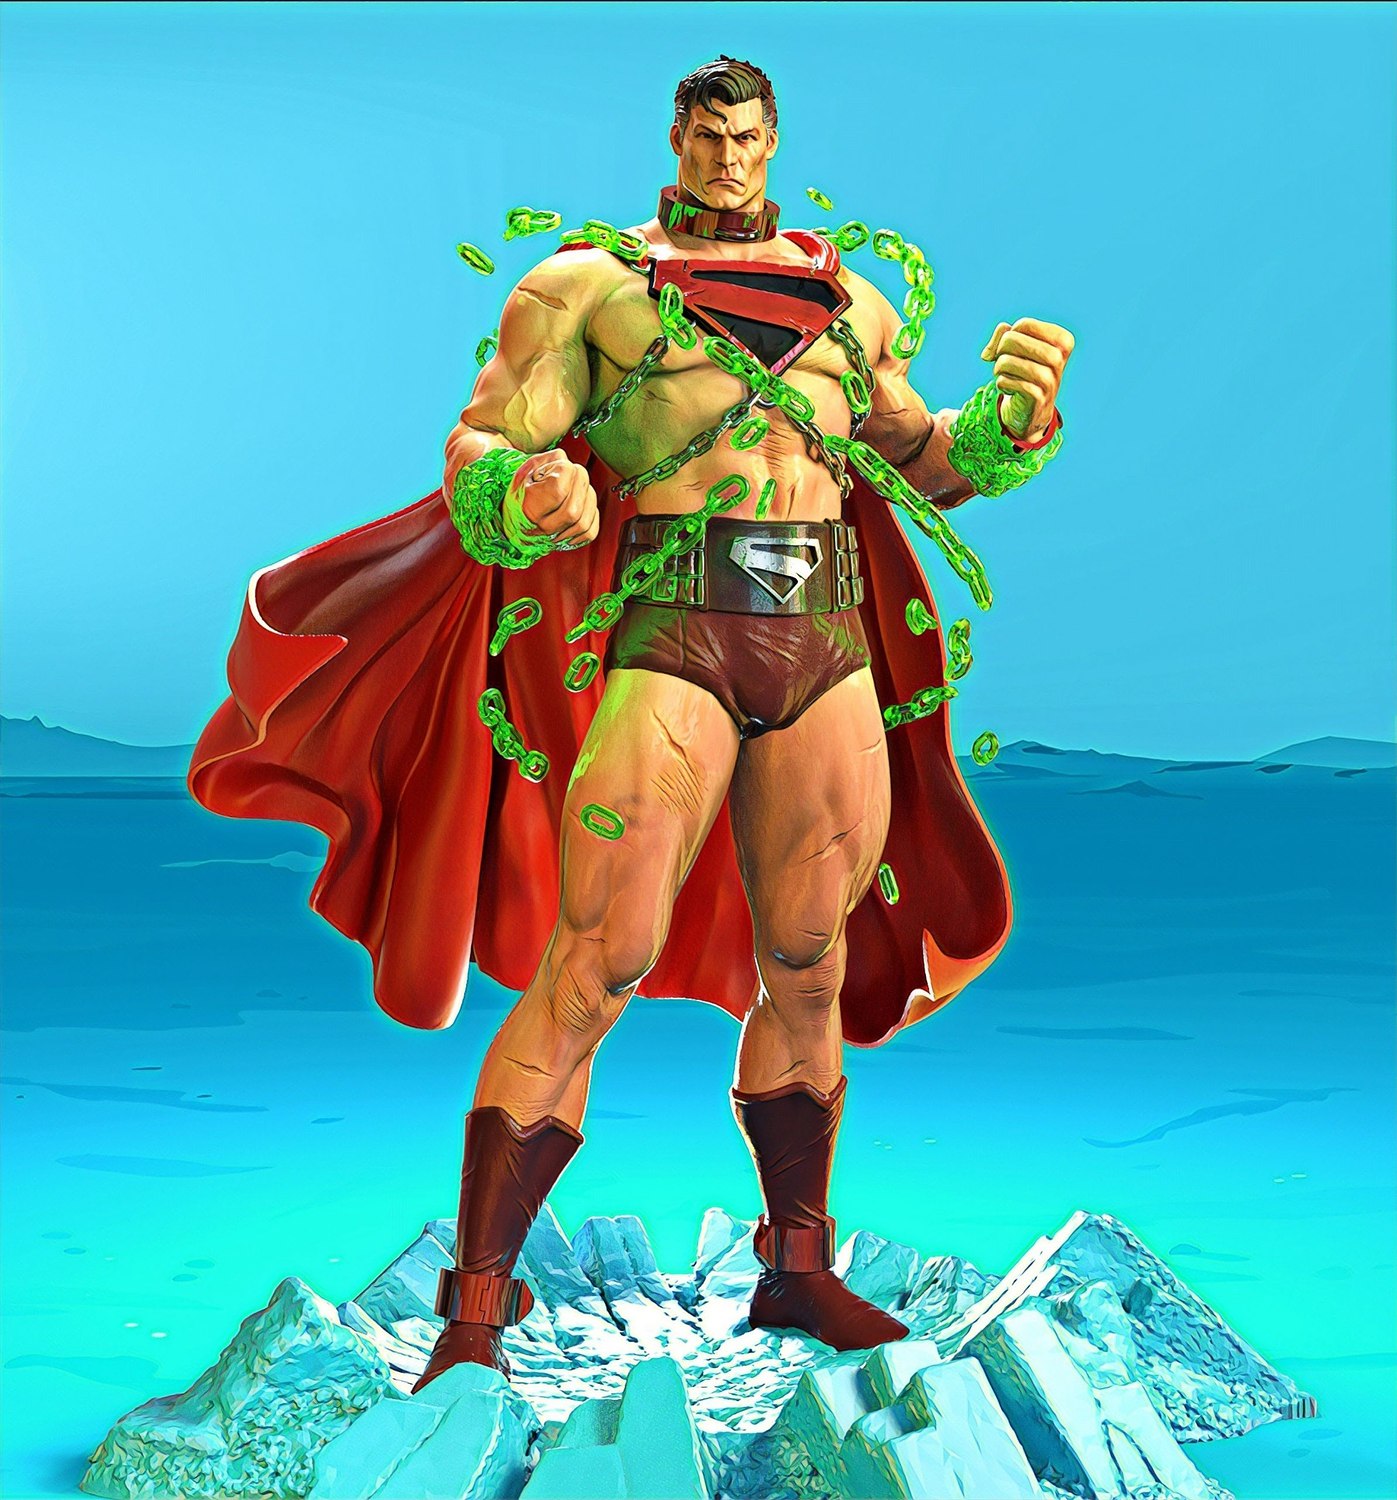 Gladiator Superman from Worlds of War